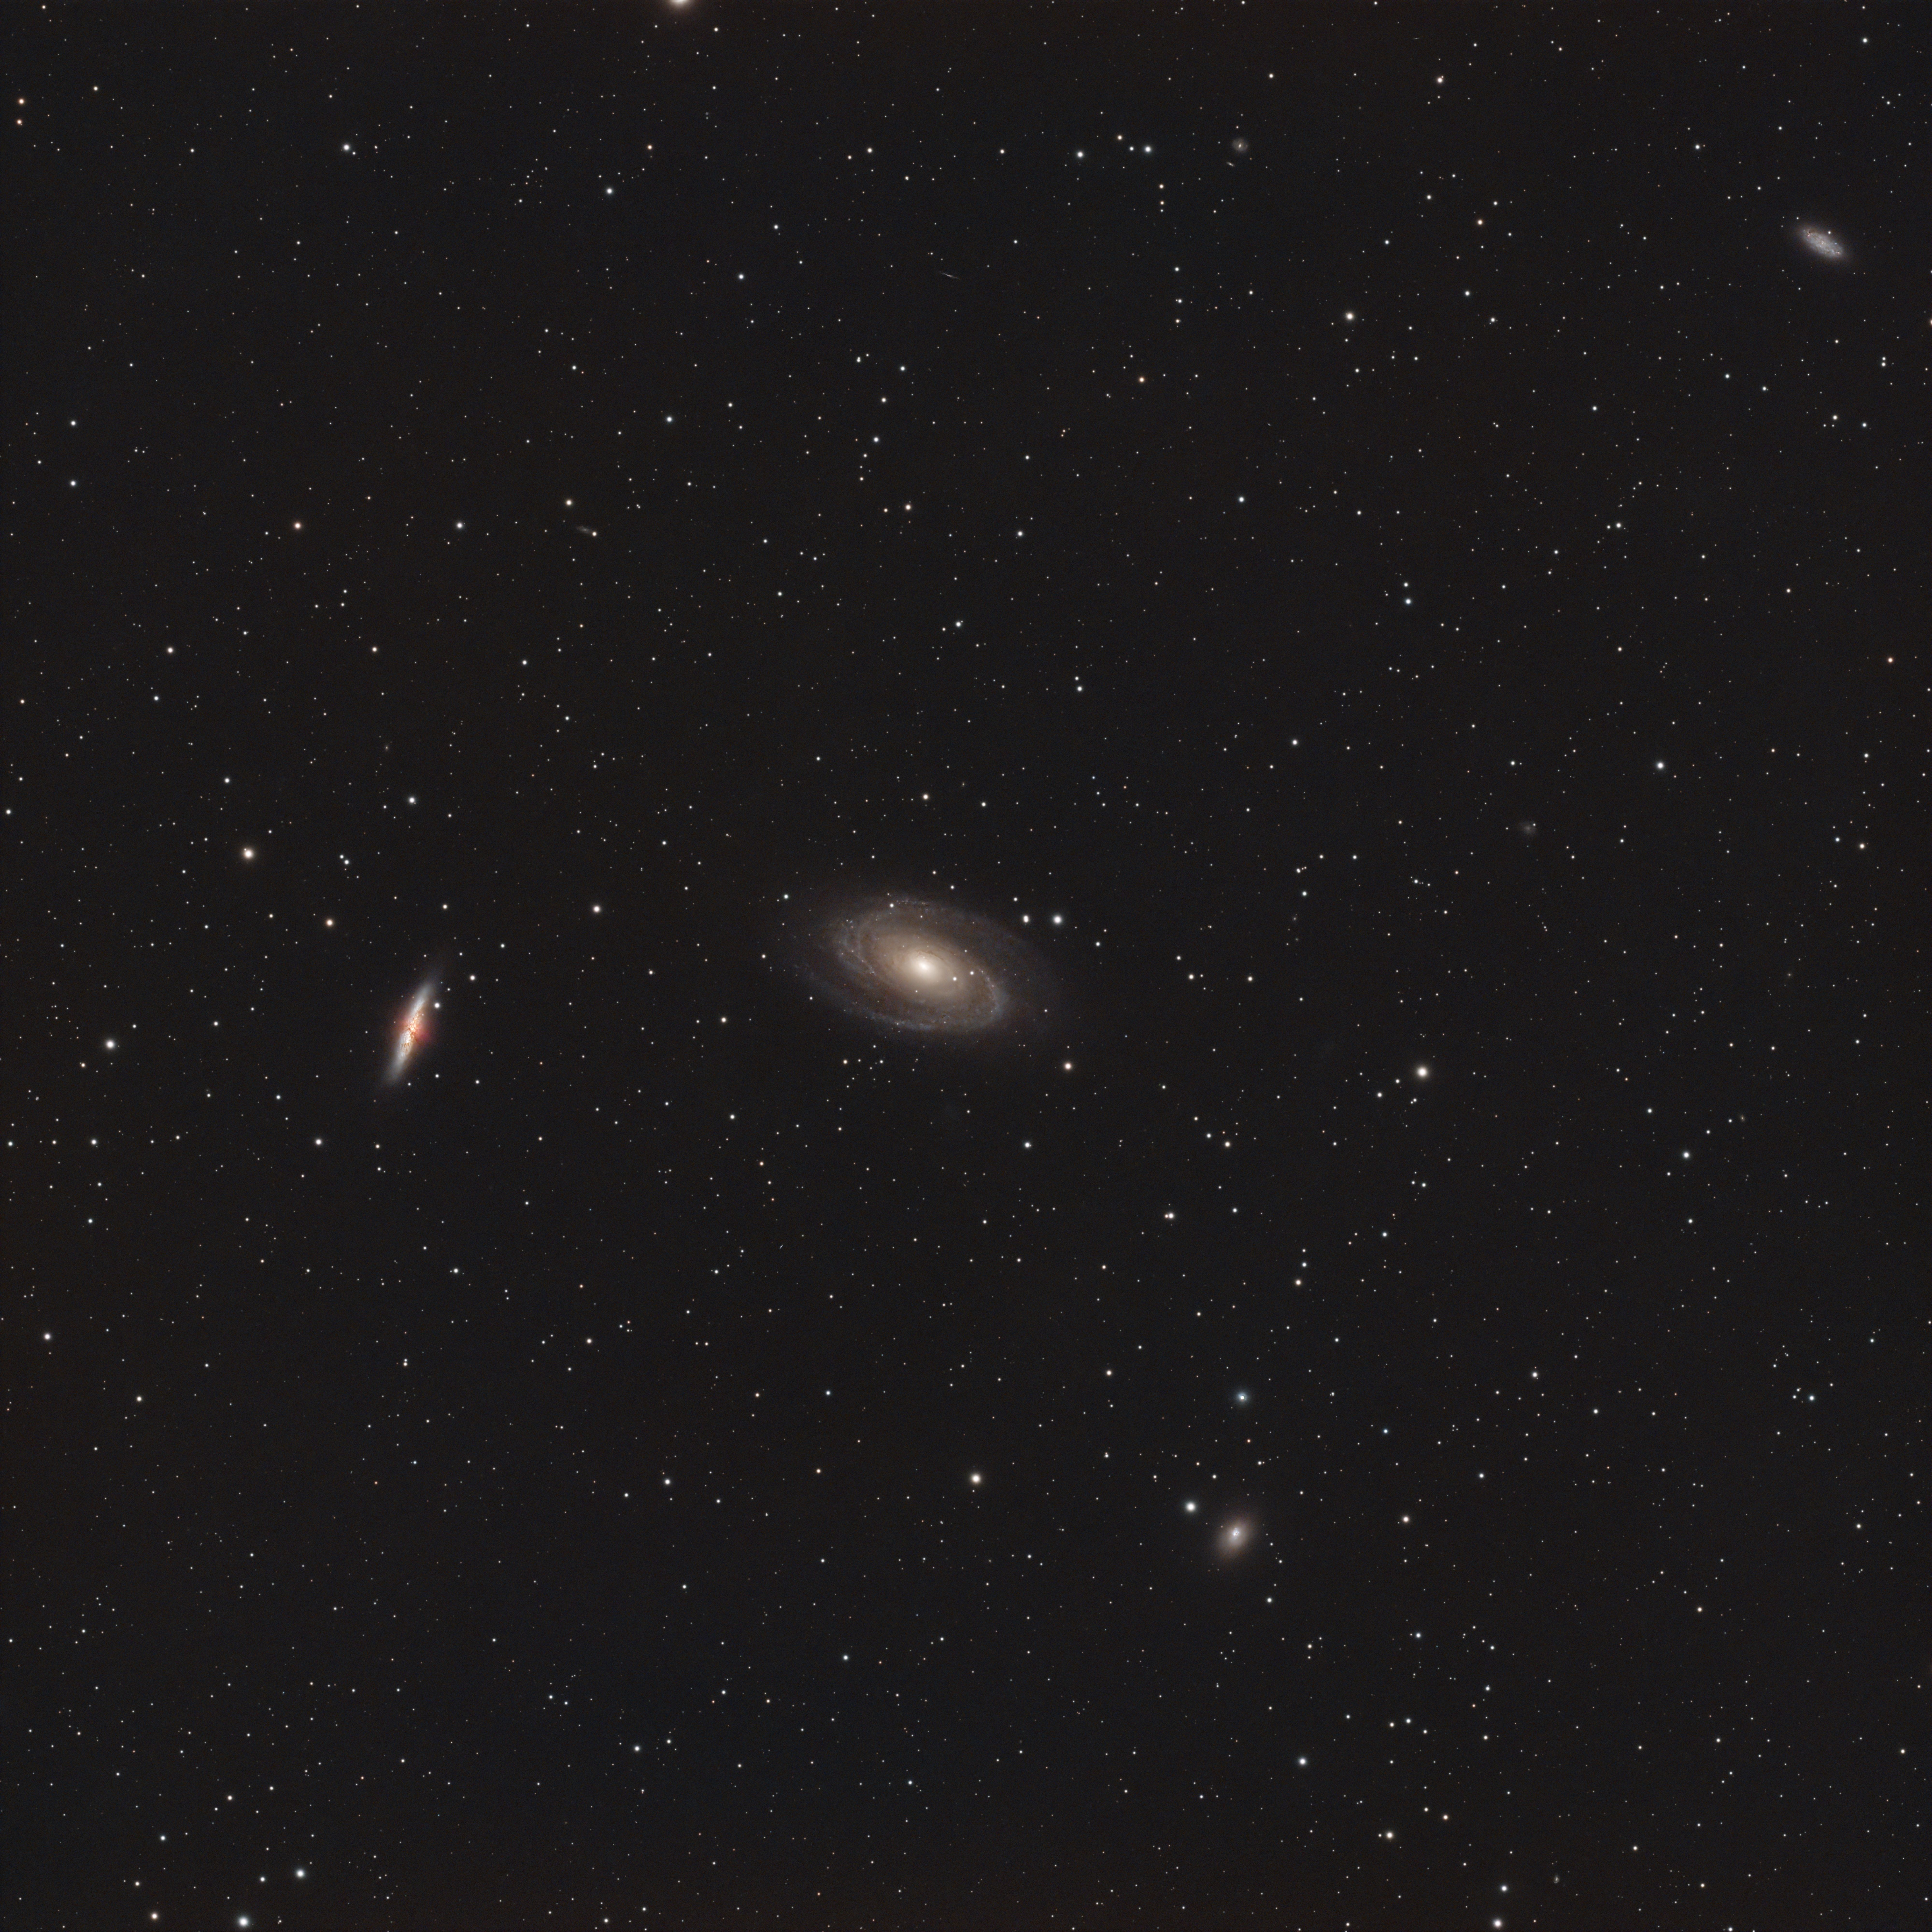 M81 and M82, Bode's Galaxy and Cigar Galaxy